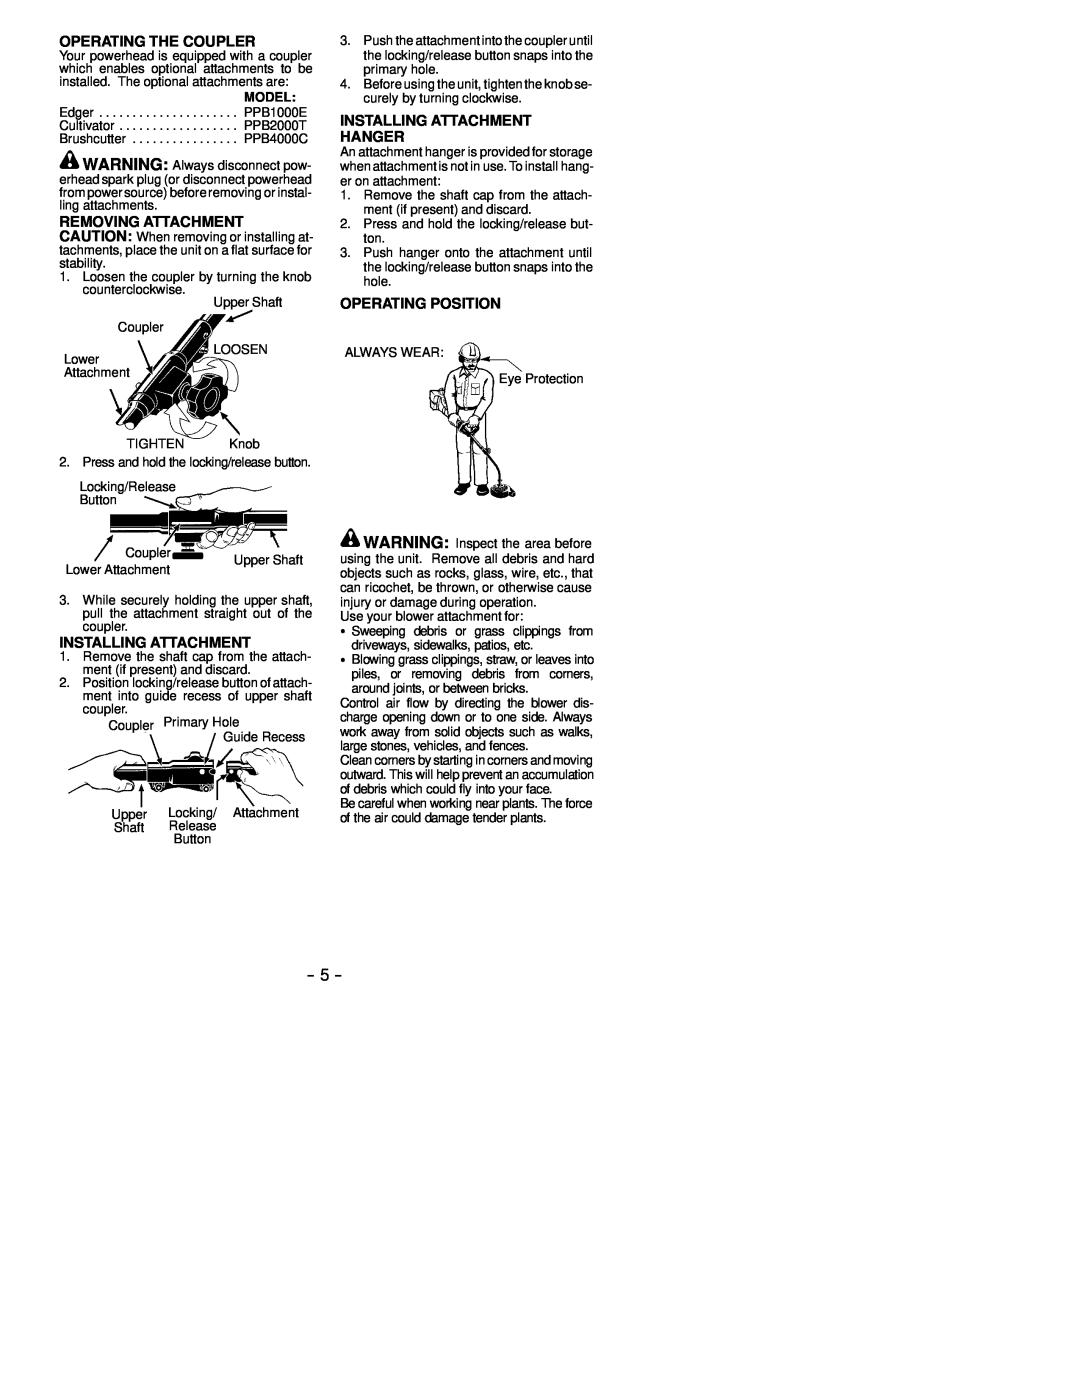 Poulan 530164260 instruction manual Operating The Coupler, Installing Attachment Hanger, Operating Position, Model 